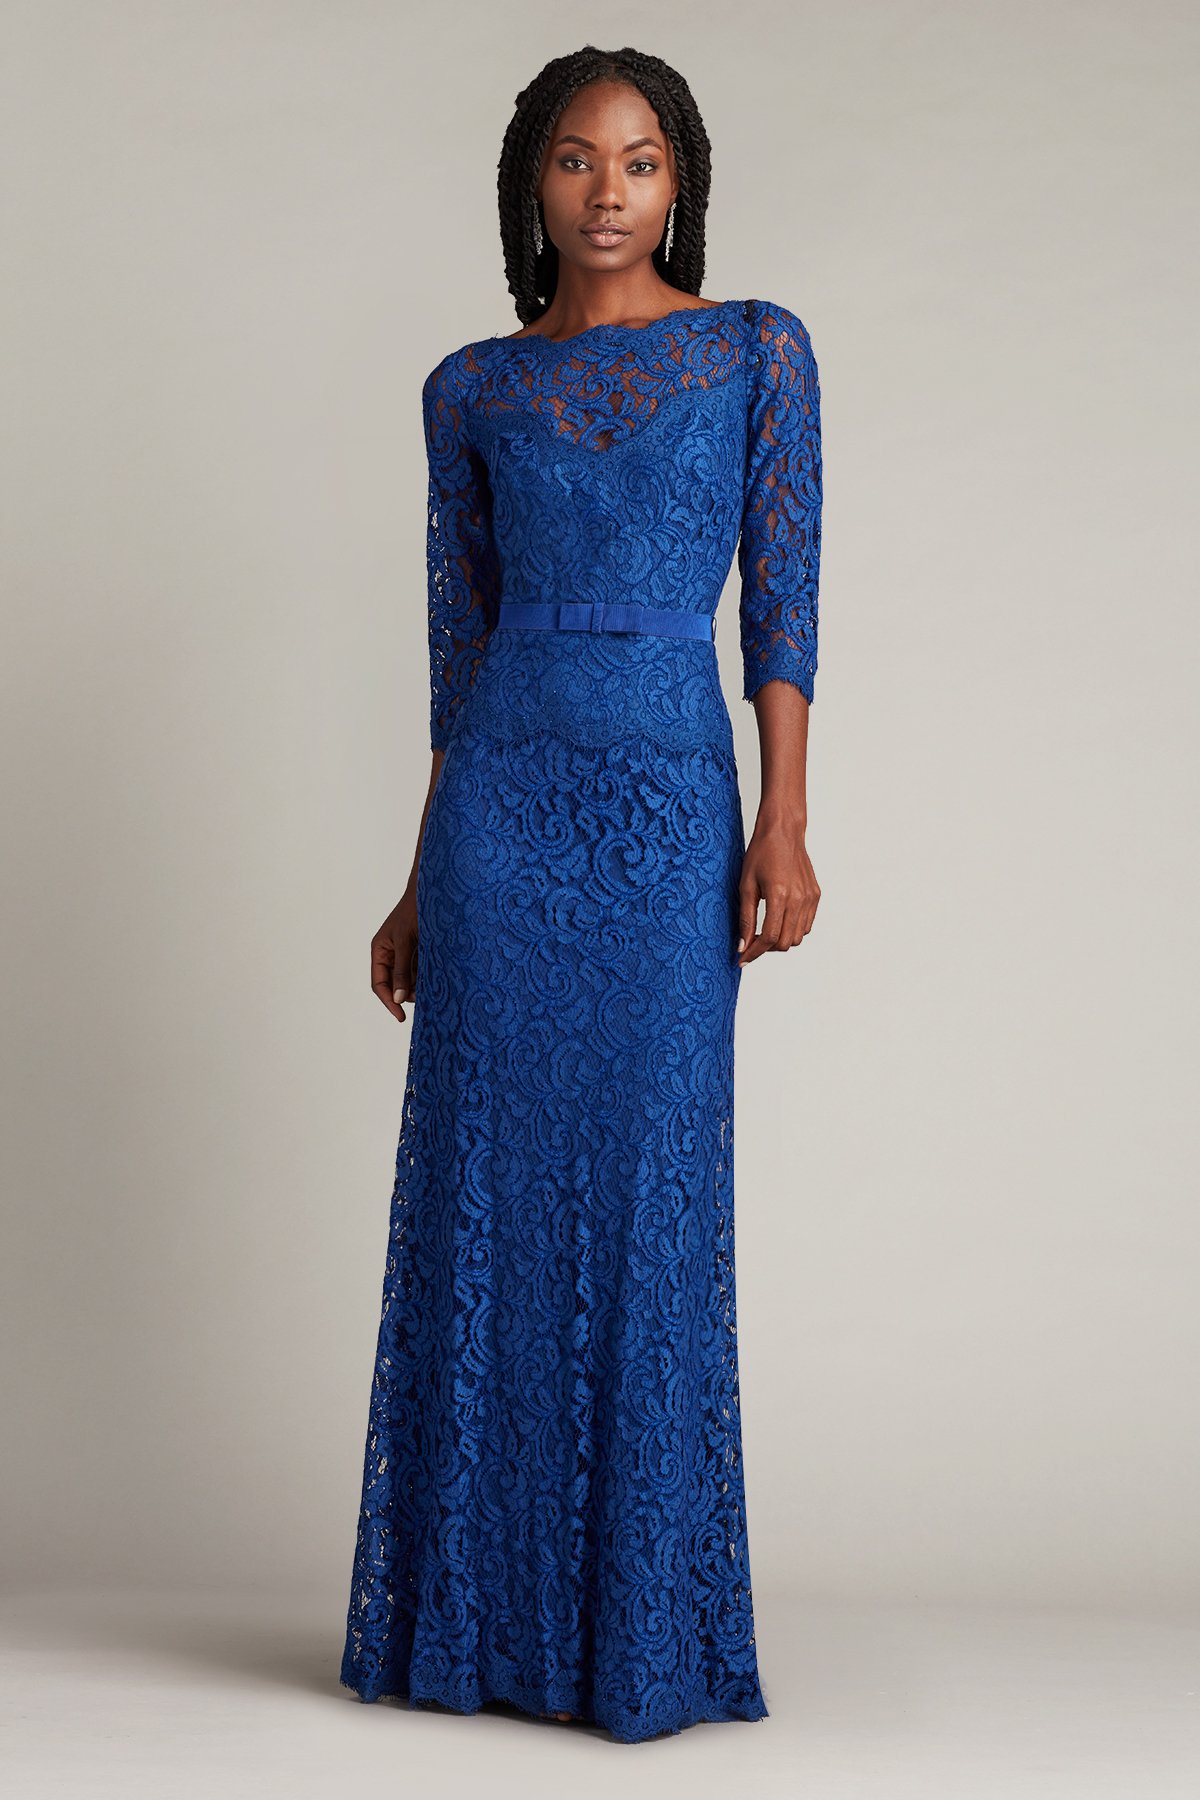 Amberly Belted Lace ¾ Sleeve Gown